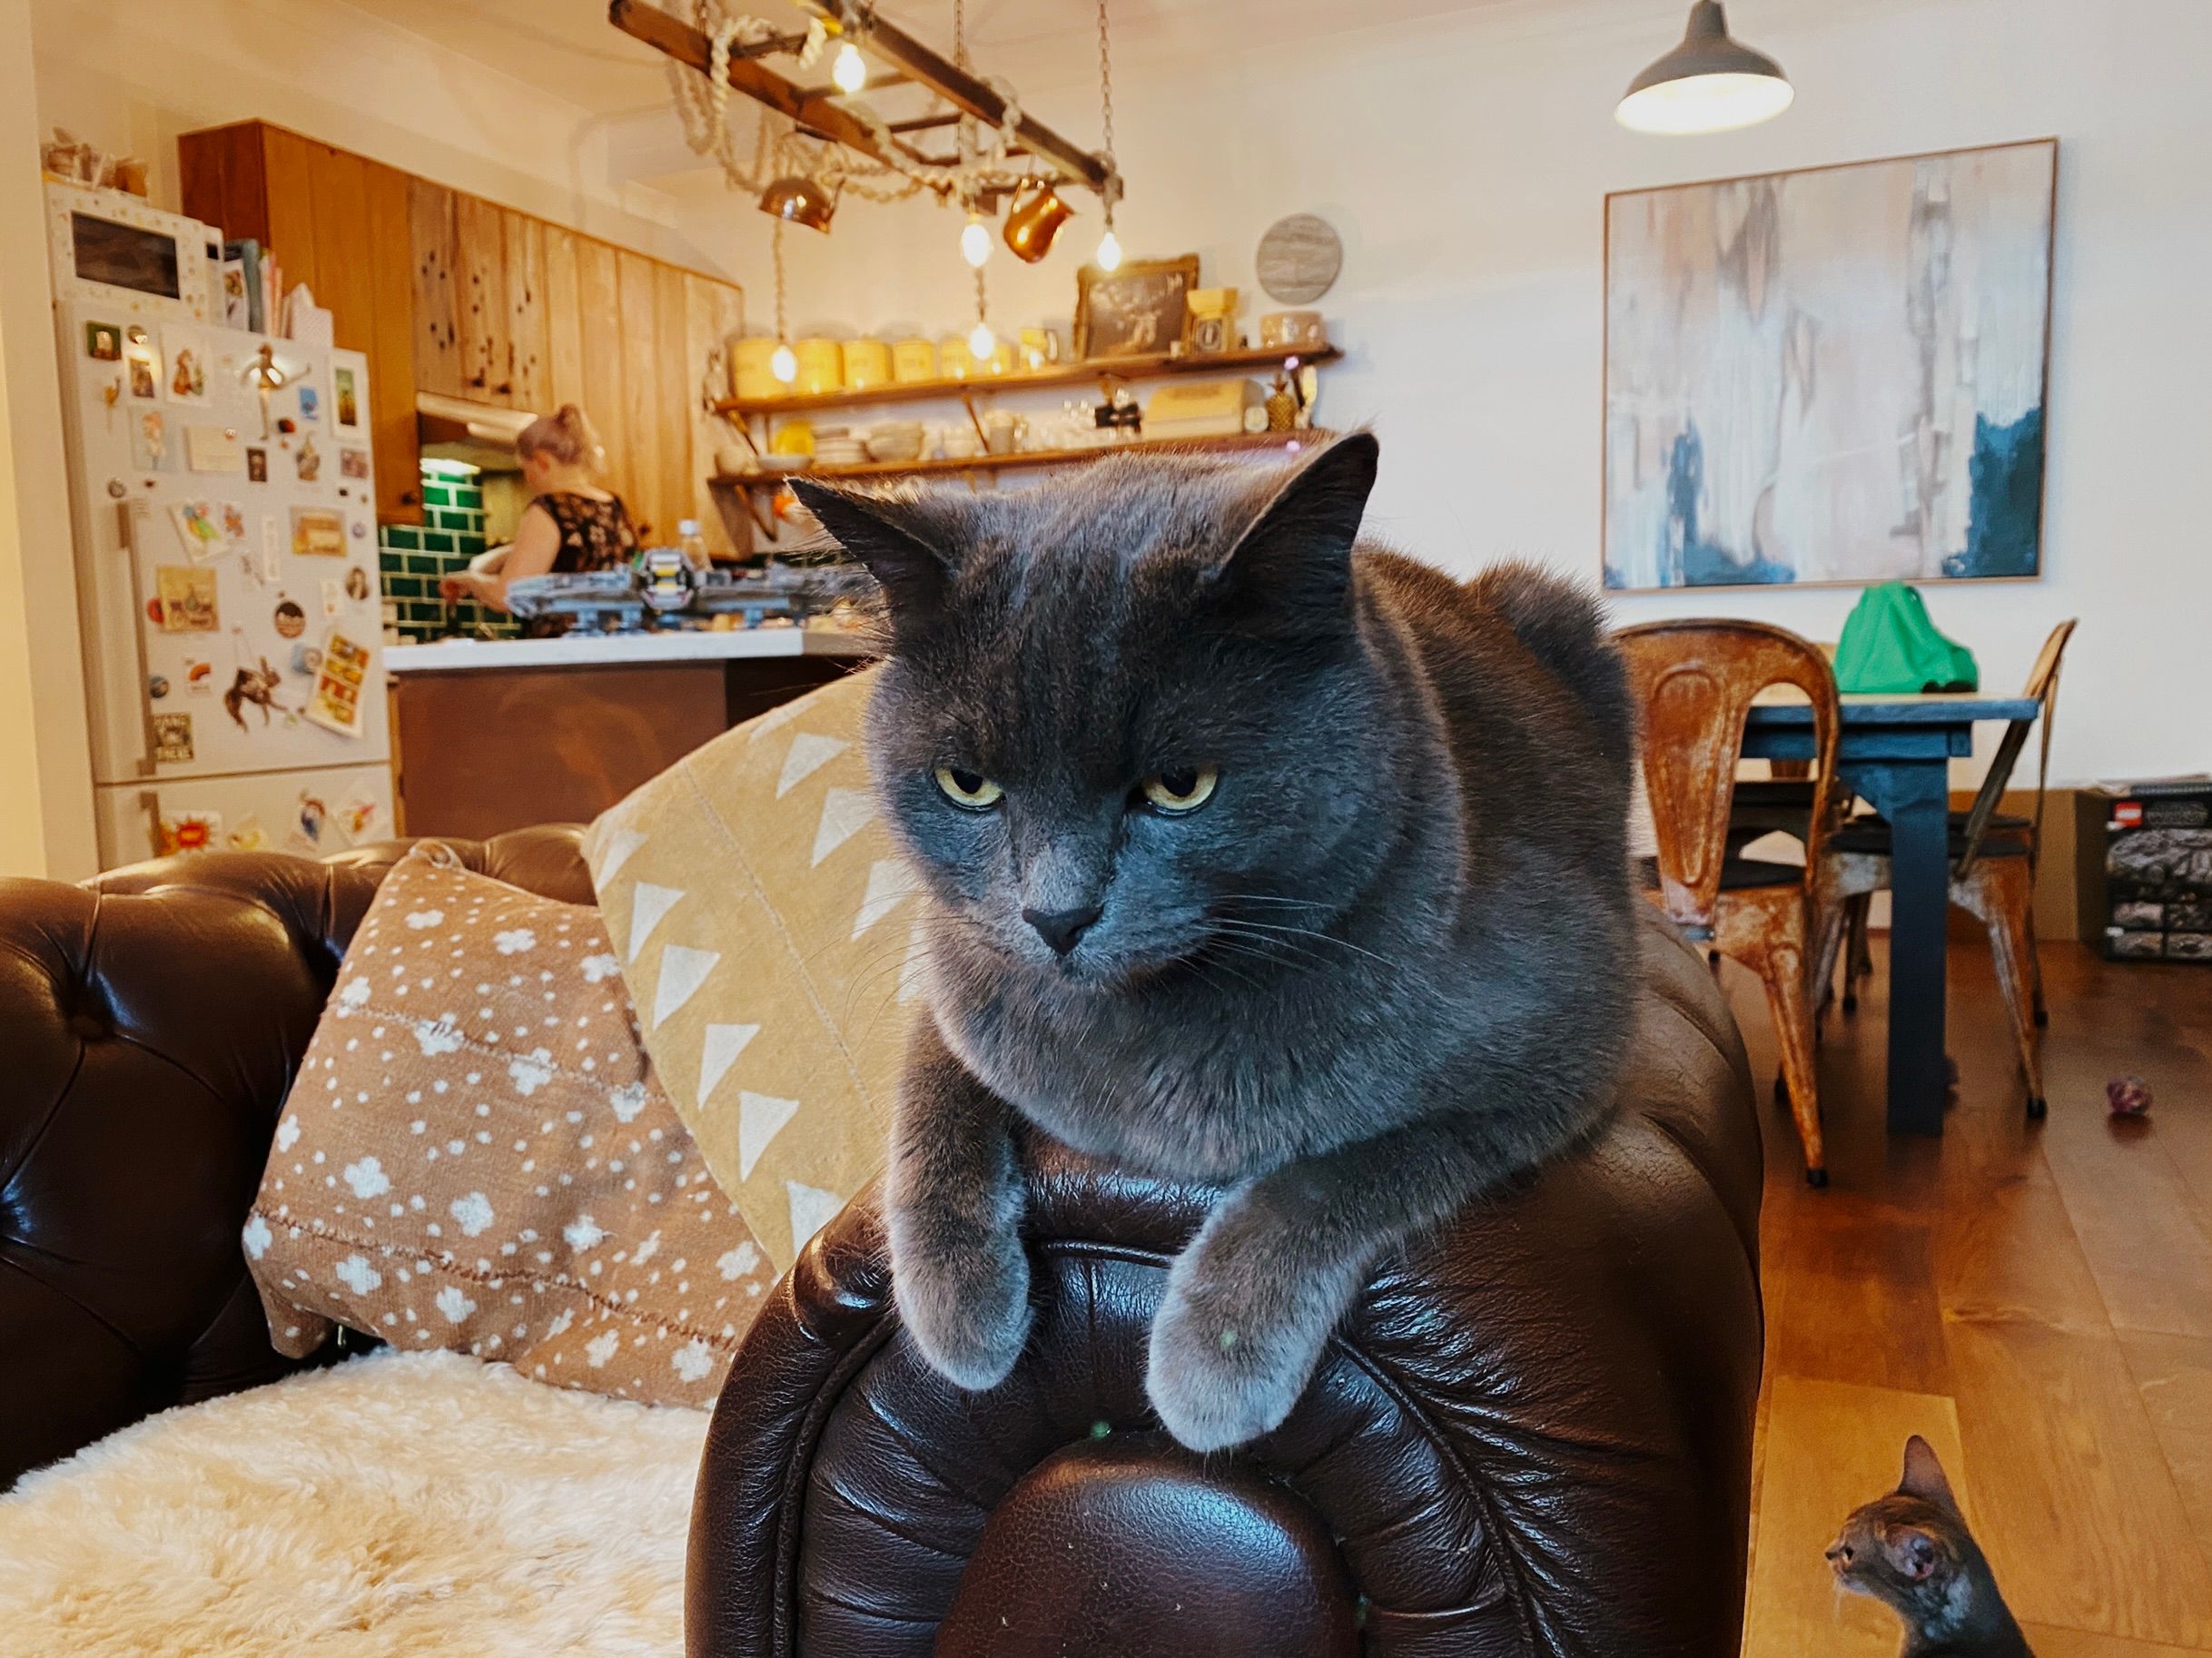 A photo of a Russian Blue cat sitting on the arm of a brown leather armchair.